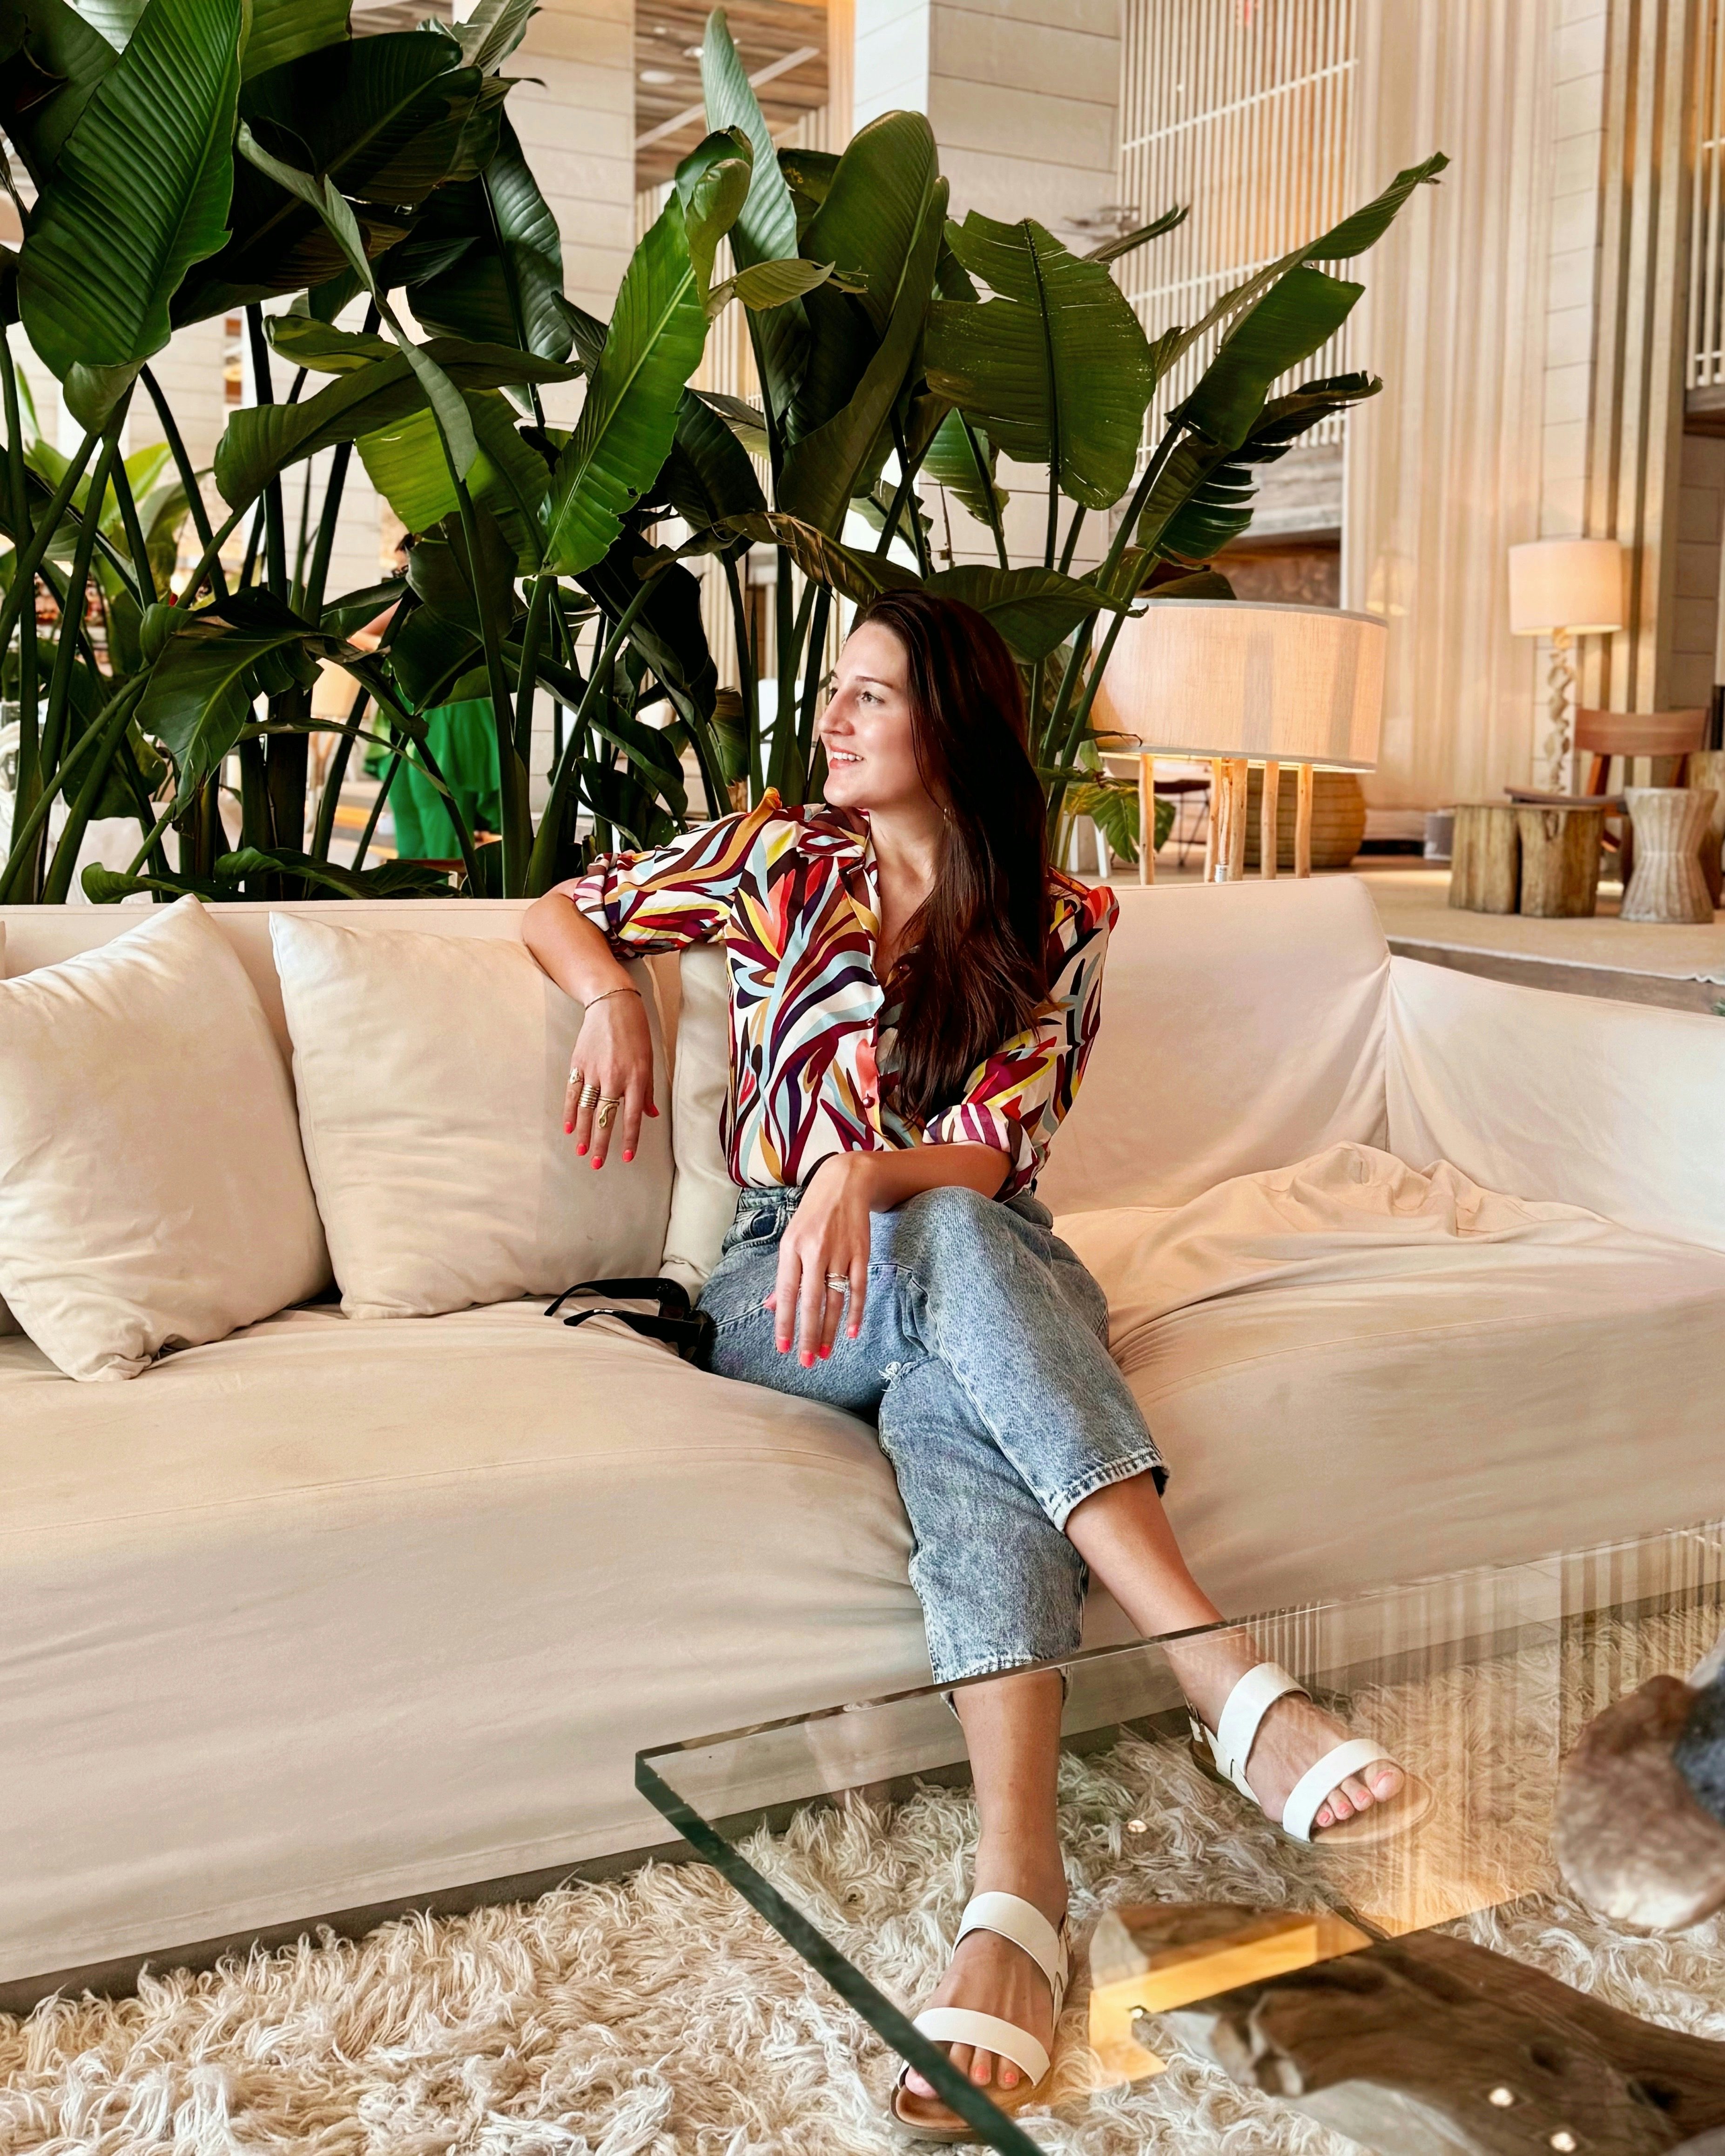 Lauren in jeans with her legs crossed on a beige couch indoors in front of large plants